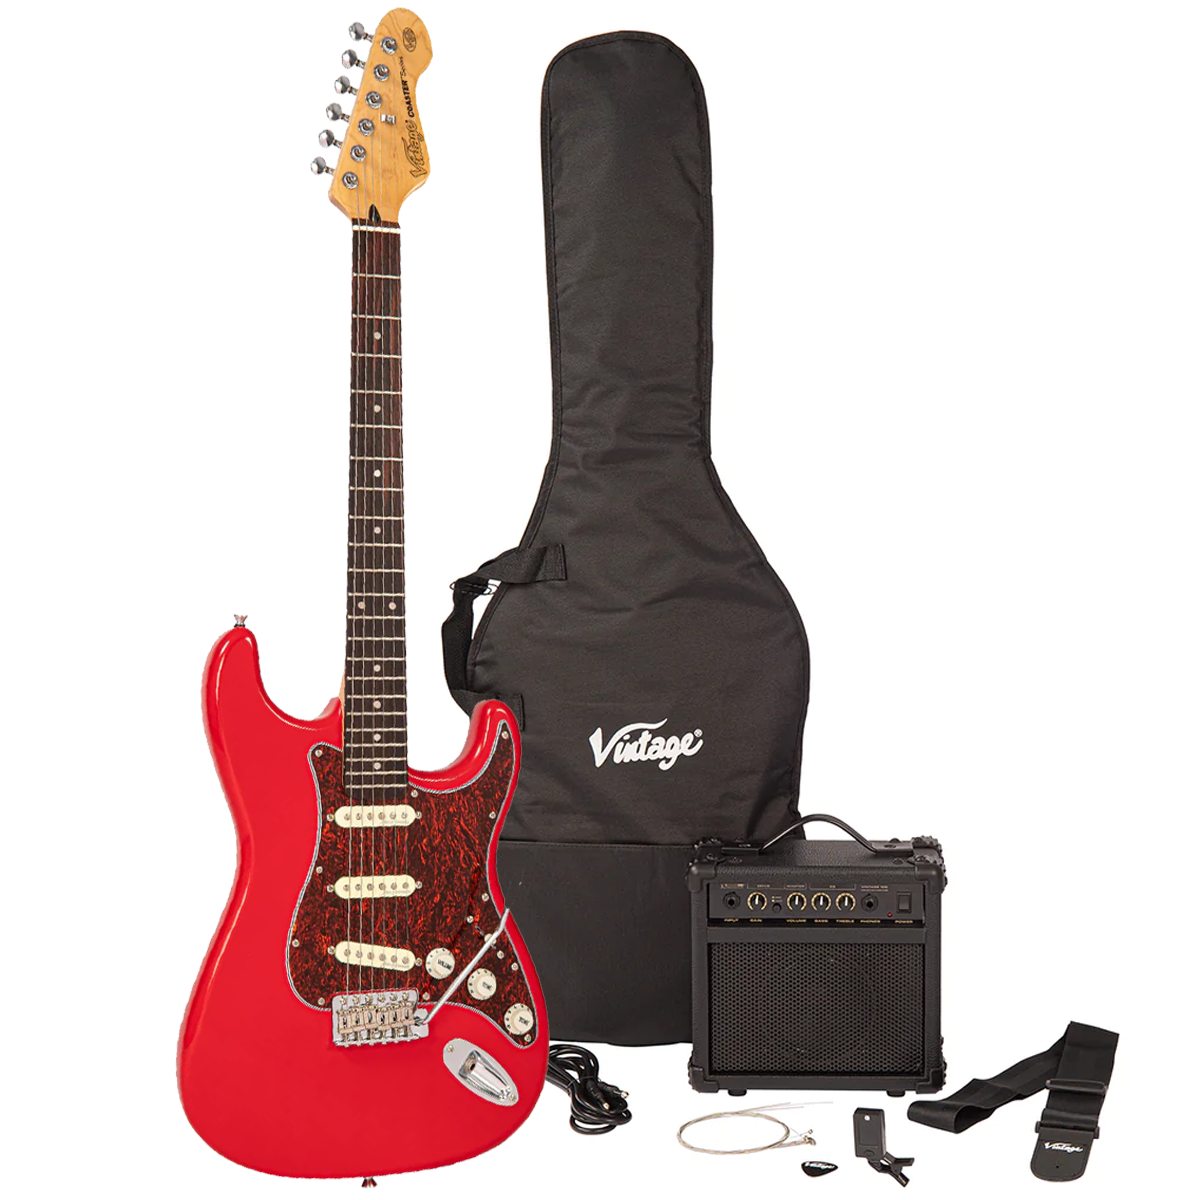 Vintage V60 Electric Guitar Starter Package with Guitar, Amp & Accessories